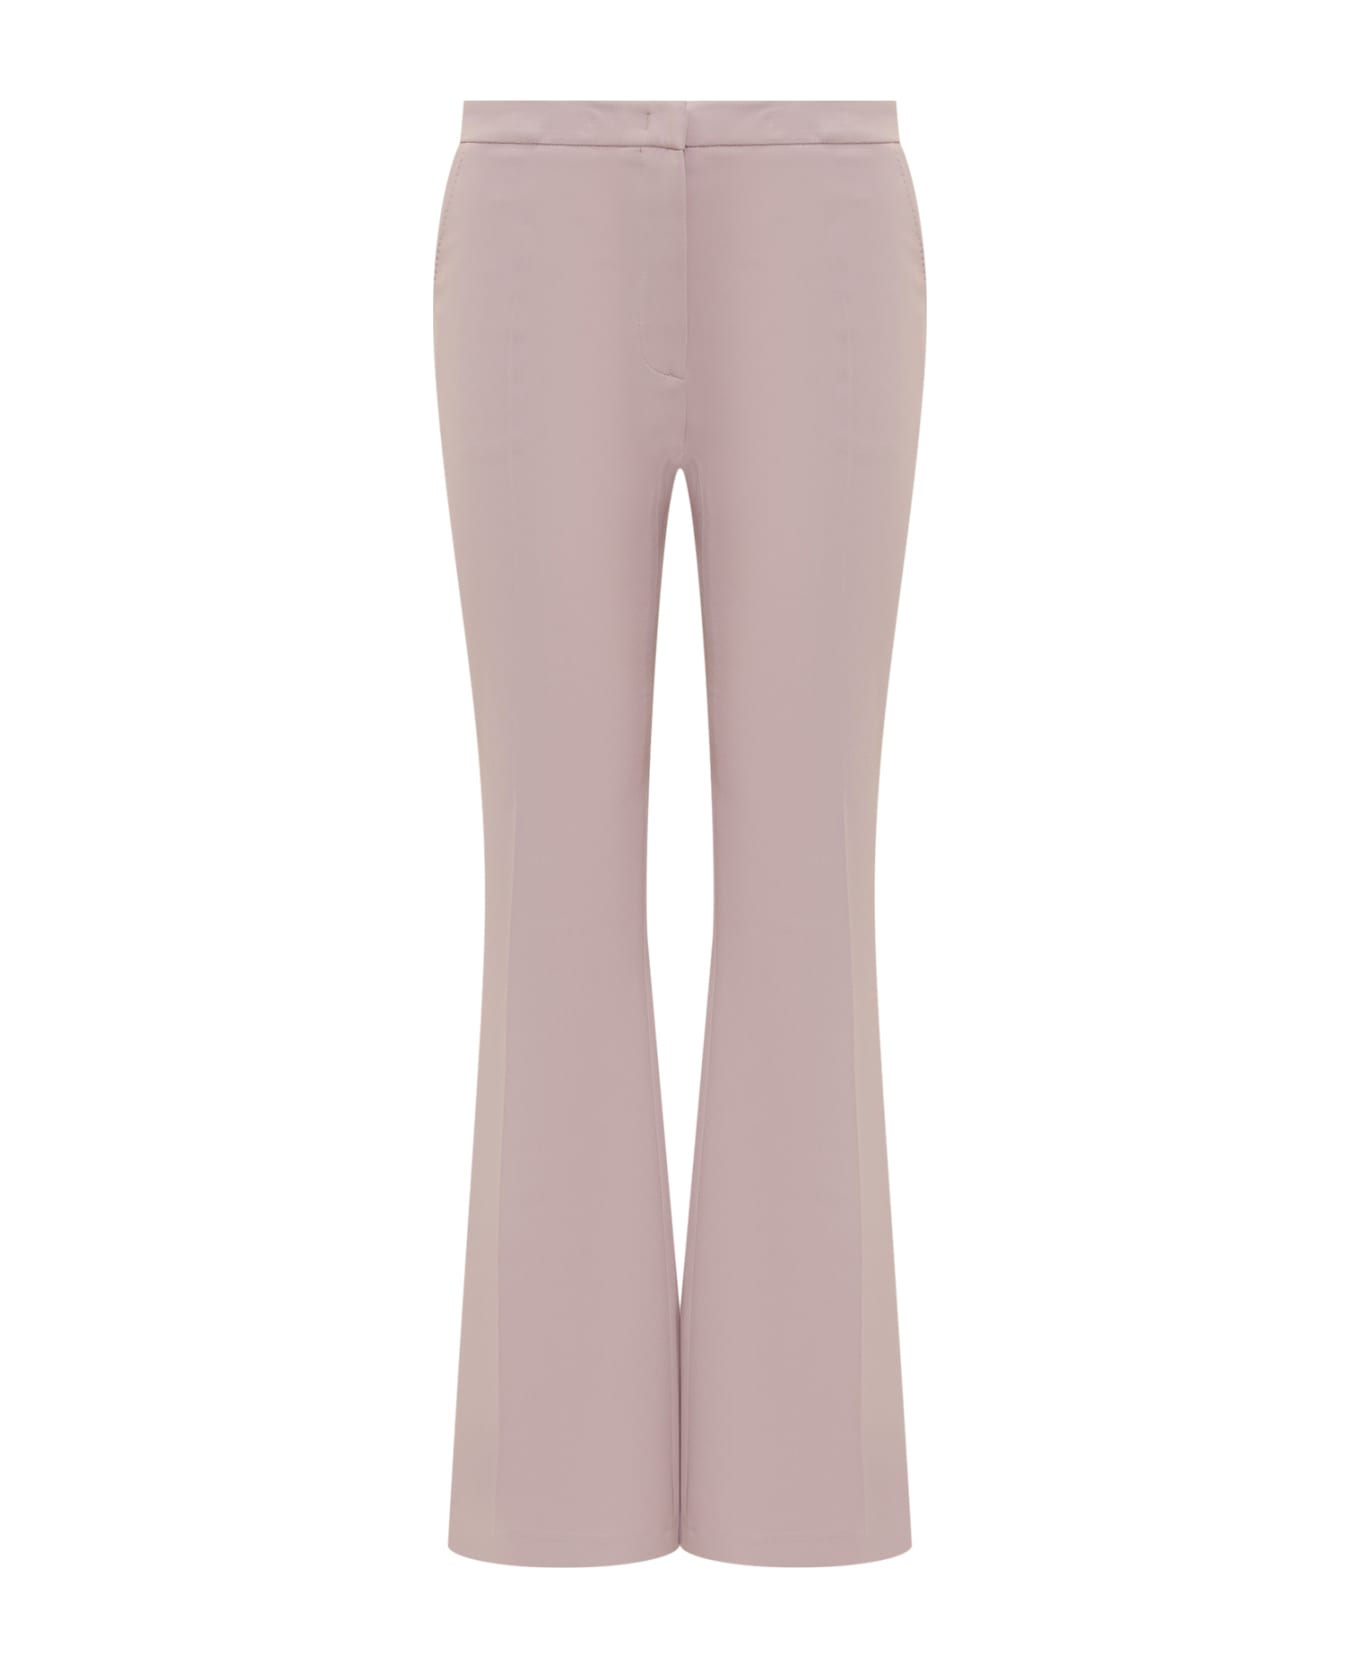 Etro Trousers - Pink